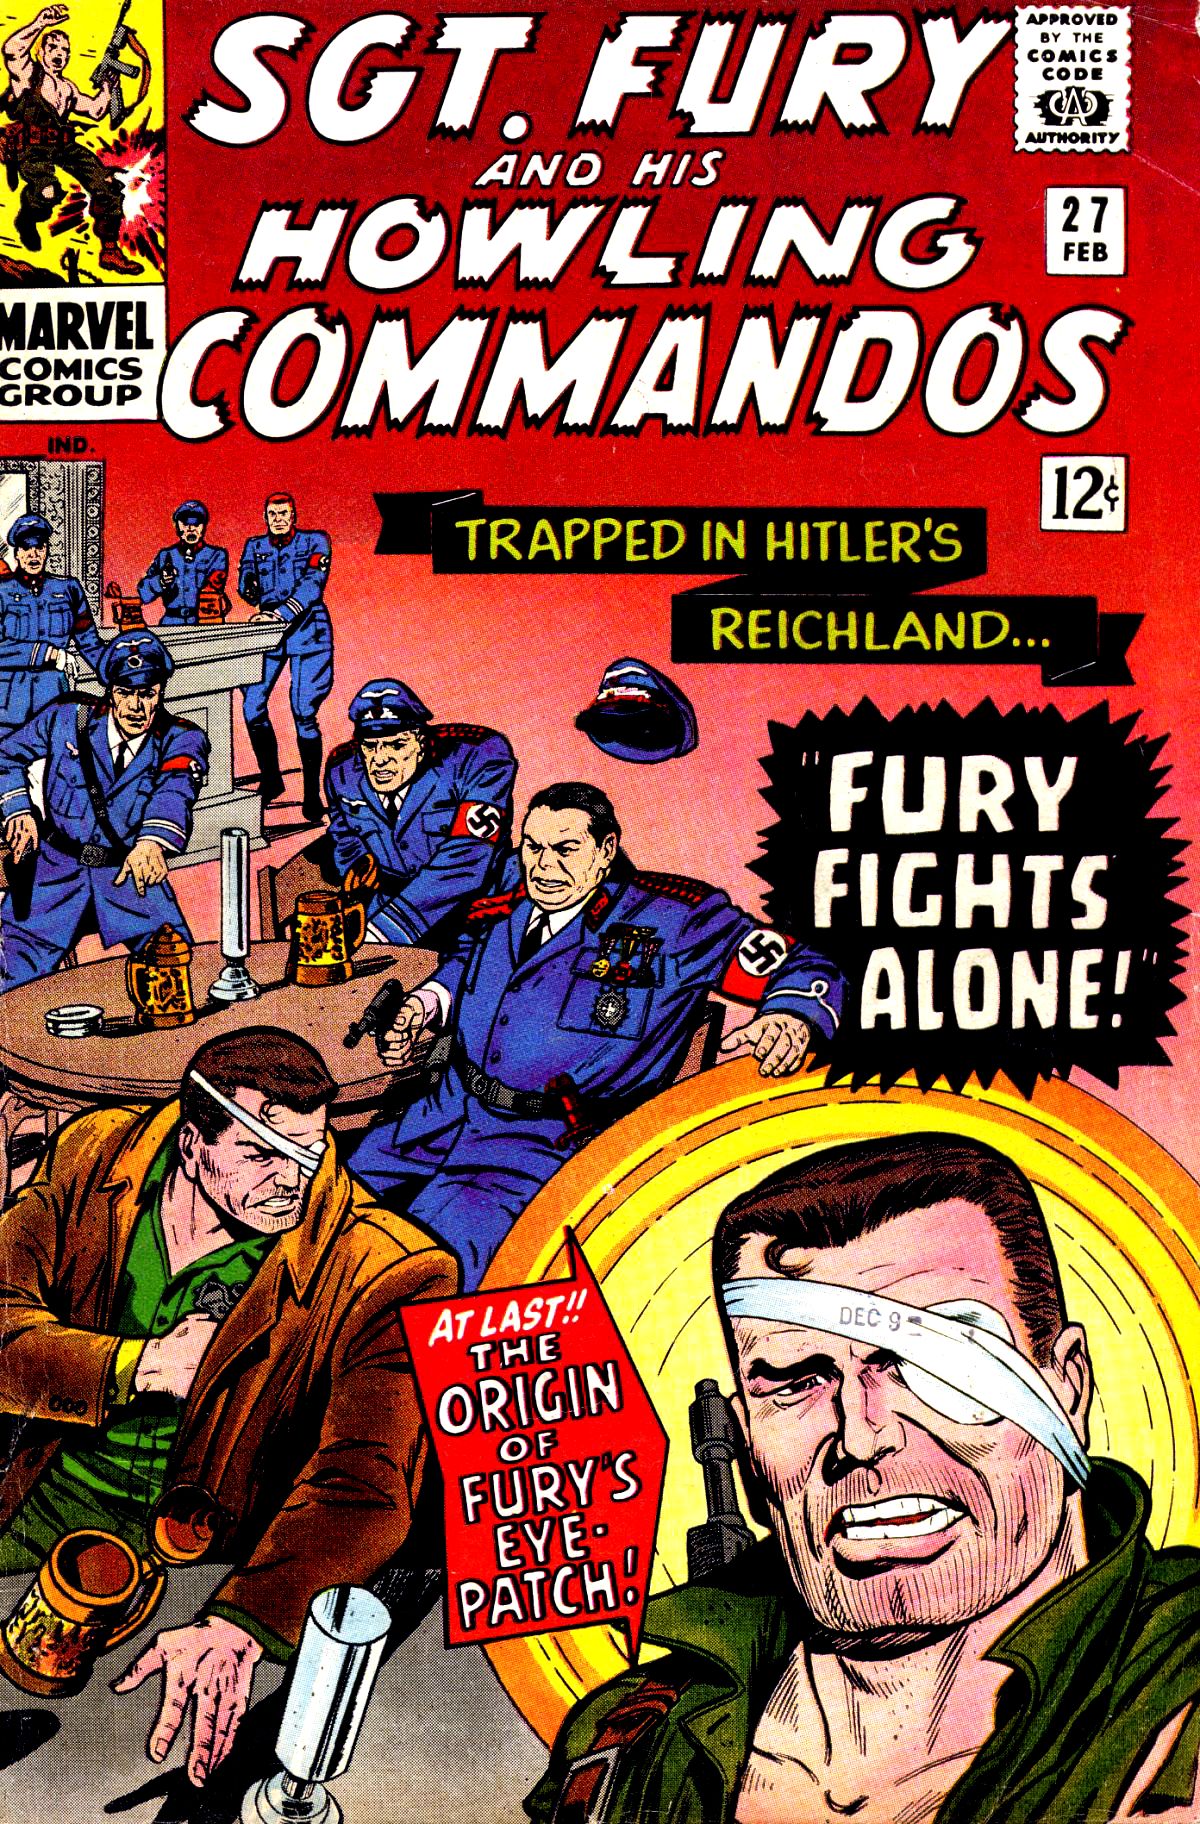 Read online Sgt. Fury comic -  Issue #27 - 1